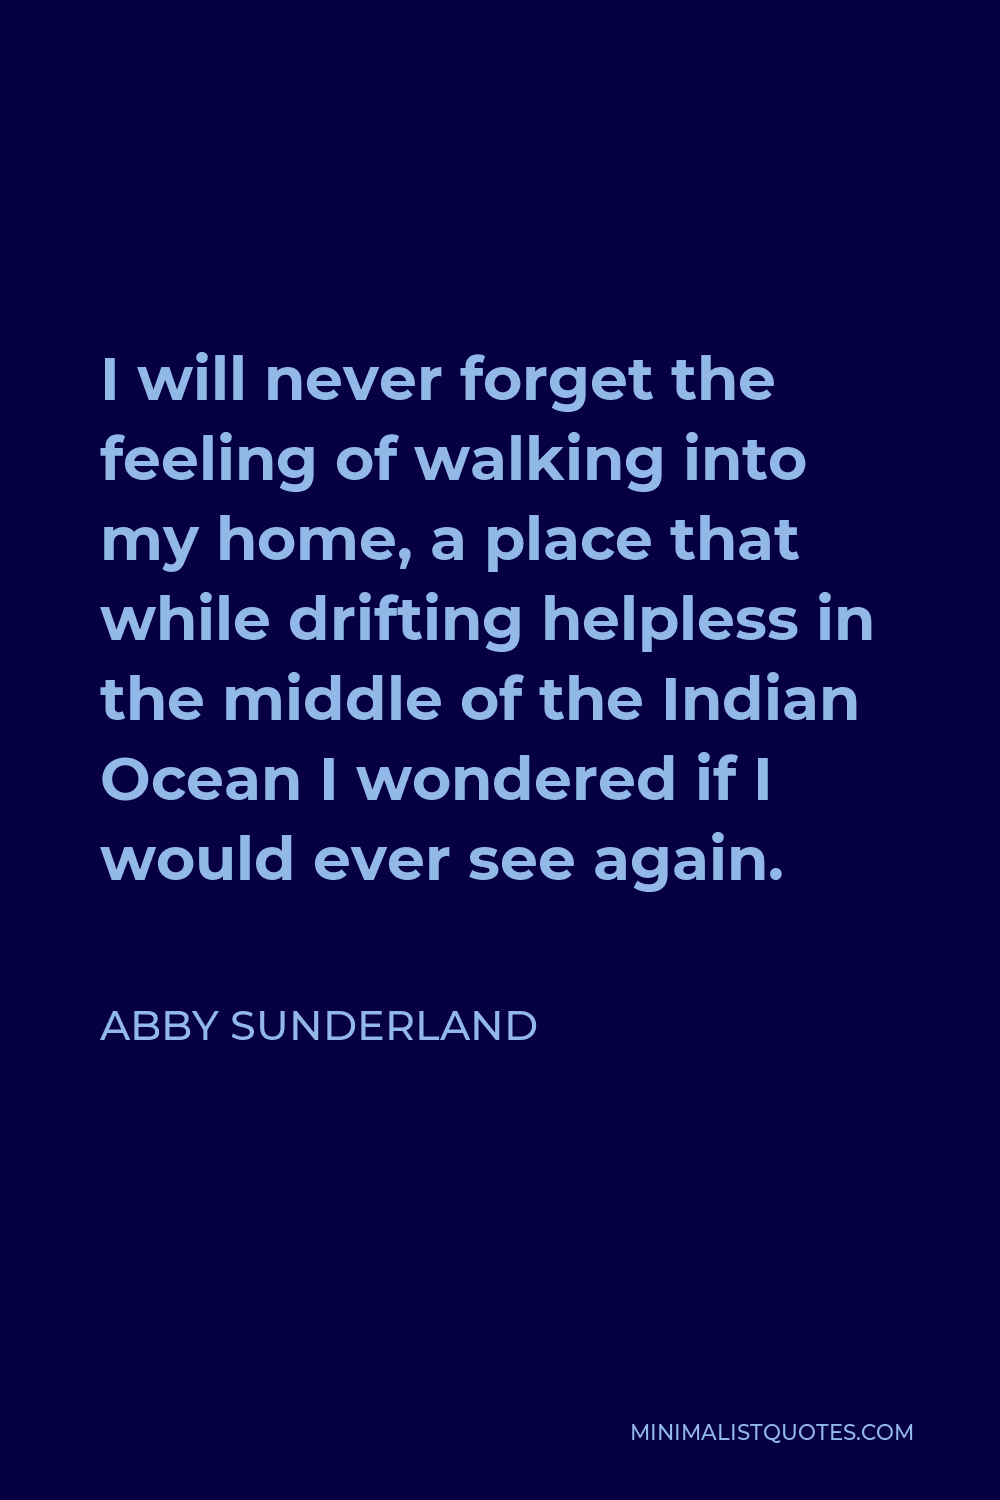 Abby Sunderland Quote - I will never forget the feeling of walking into my home, a place that while drifting helpless in the middle of the Indian Ocean I wondered if I would ever see again.